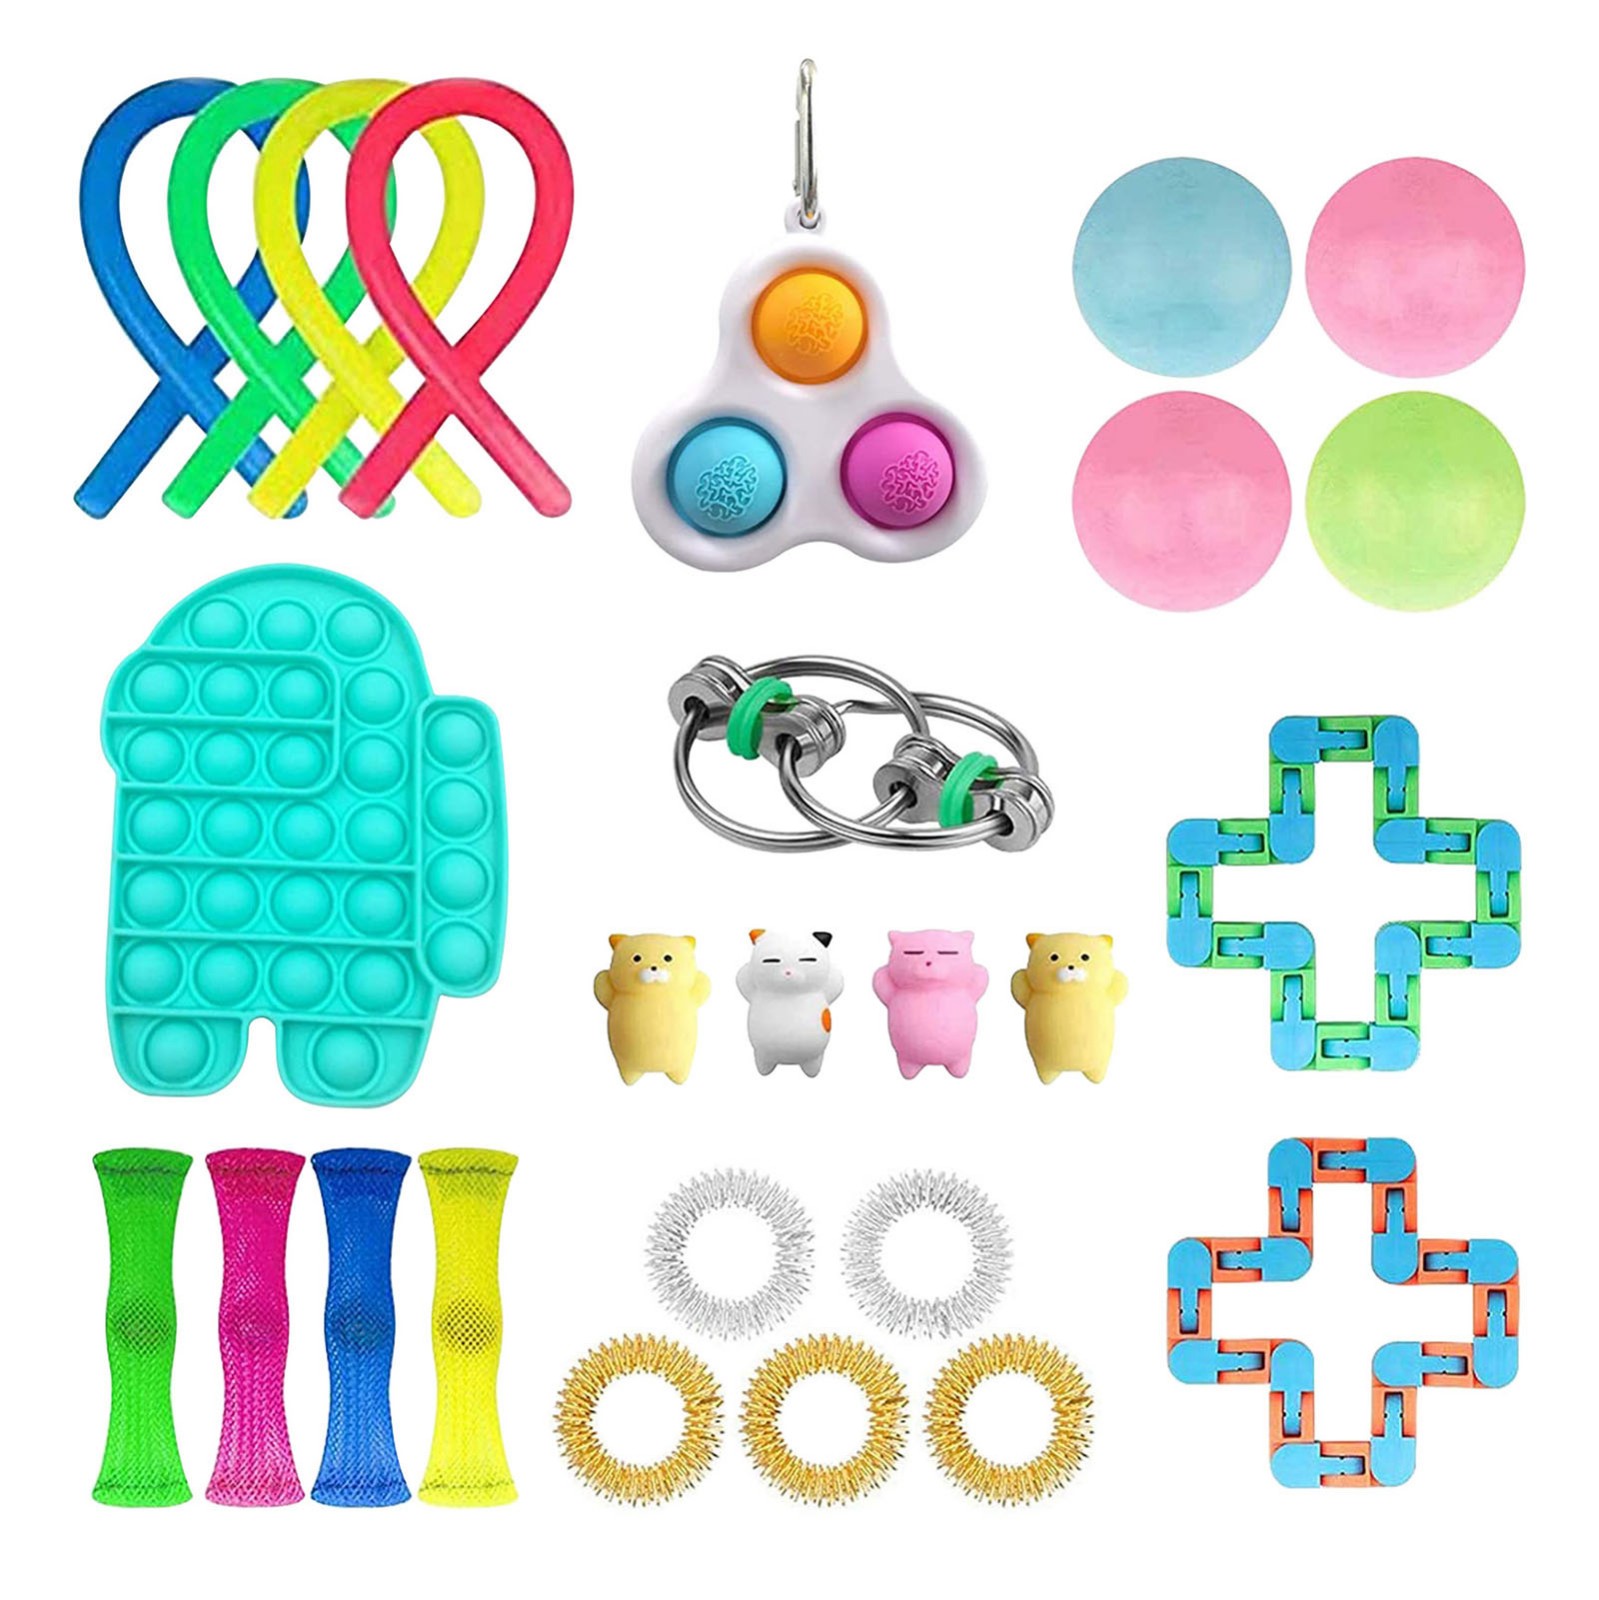 34 Pack Fidget Toys Set Sensory Fidget Toys Pack Stress Relief and Anti-anxiety Tools Pop-it Dimple Figet Toys for Kids and Adults with Colorful Pineapple Push Bubble 22Pcs Fidget Toys Set 